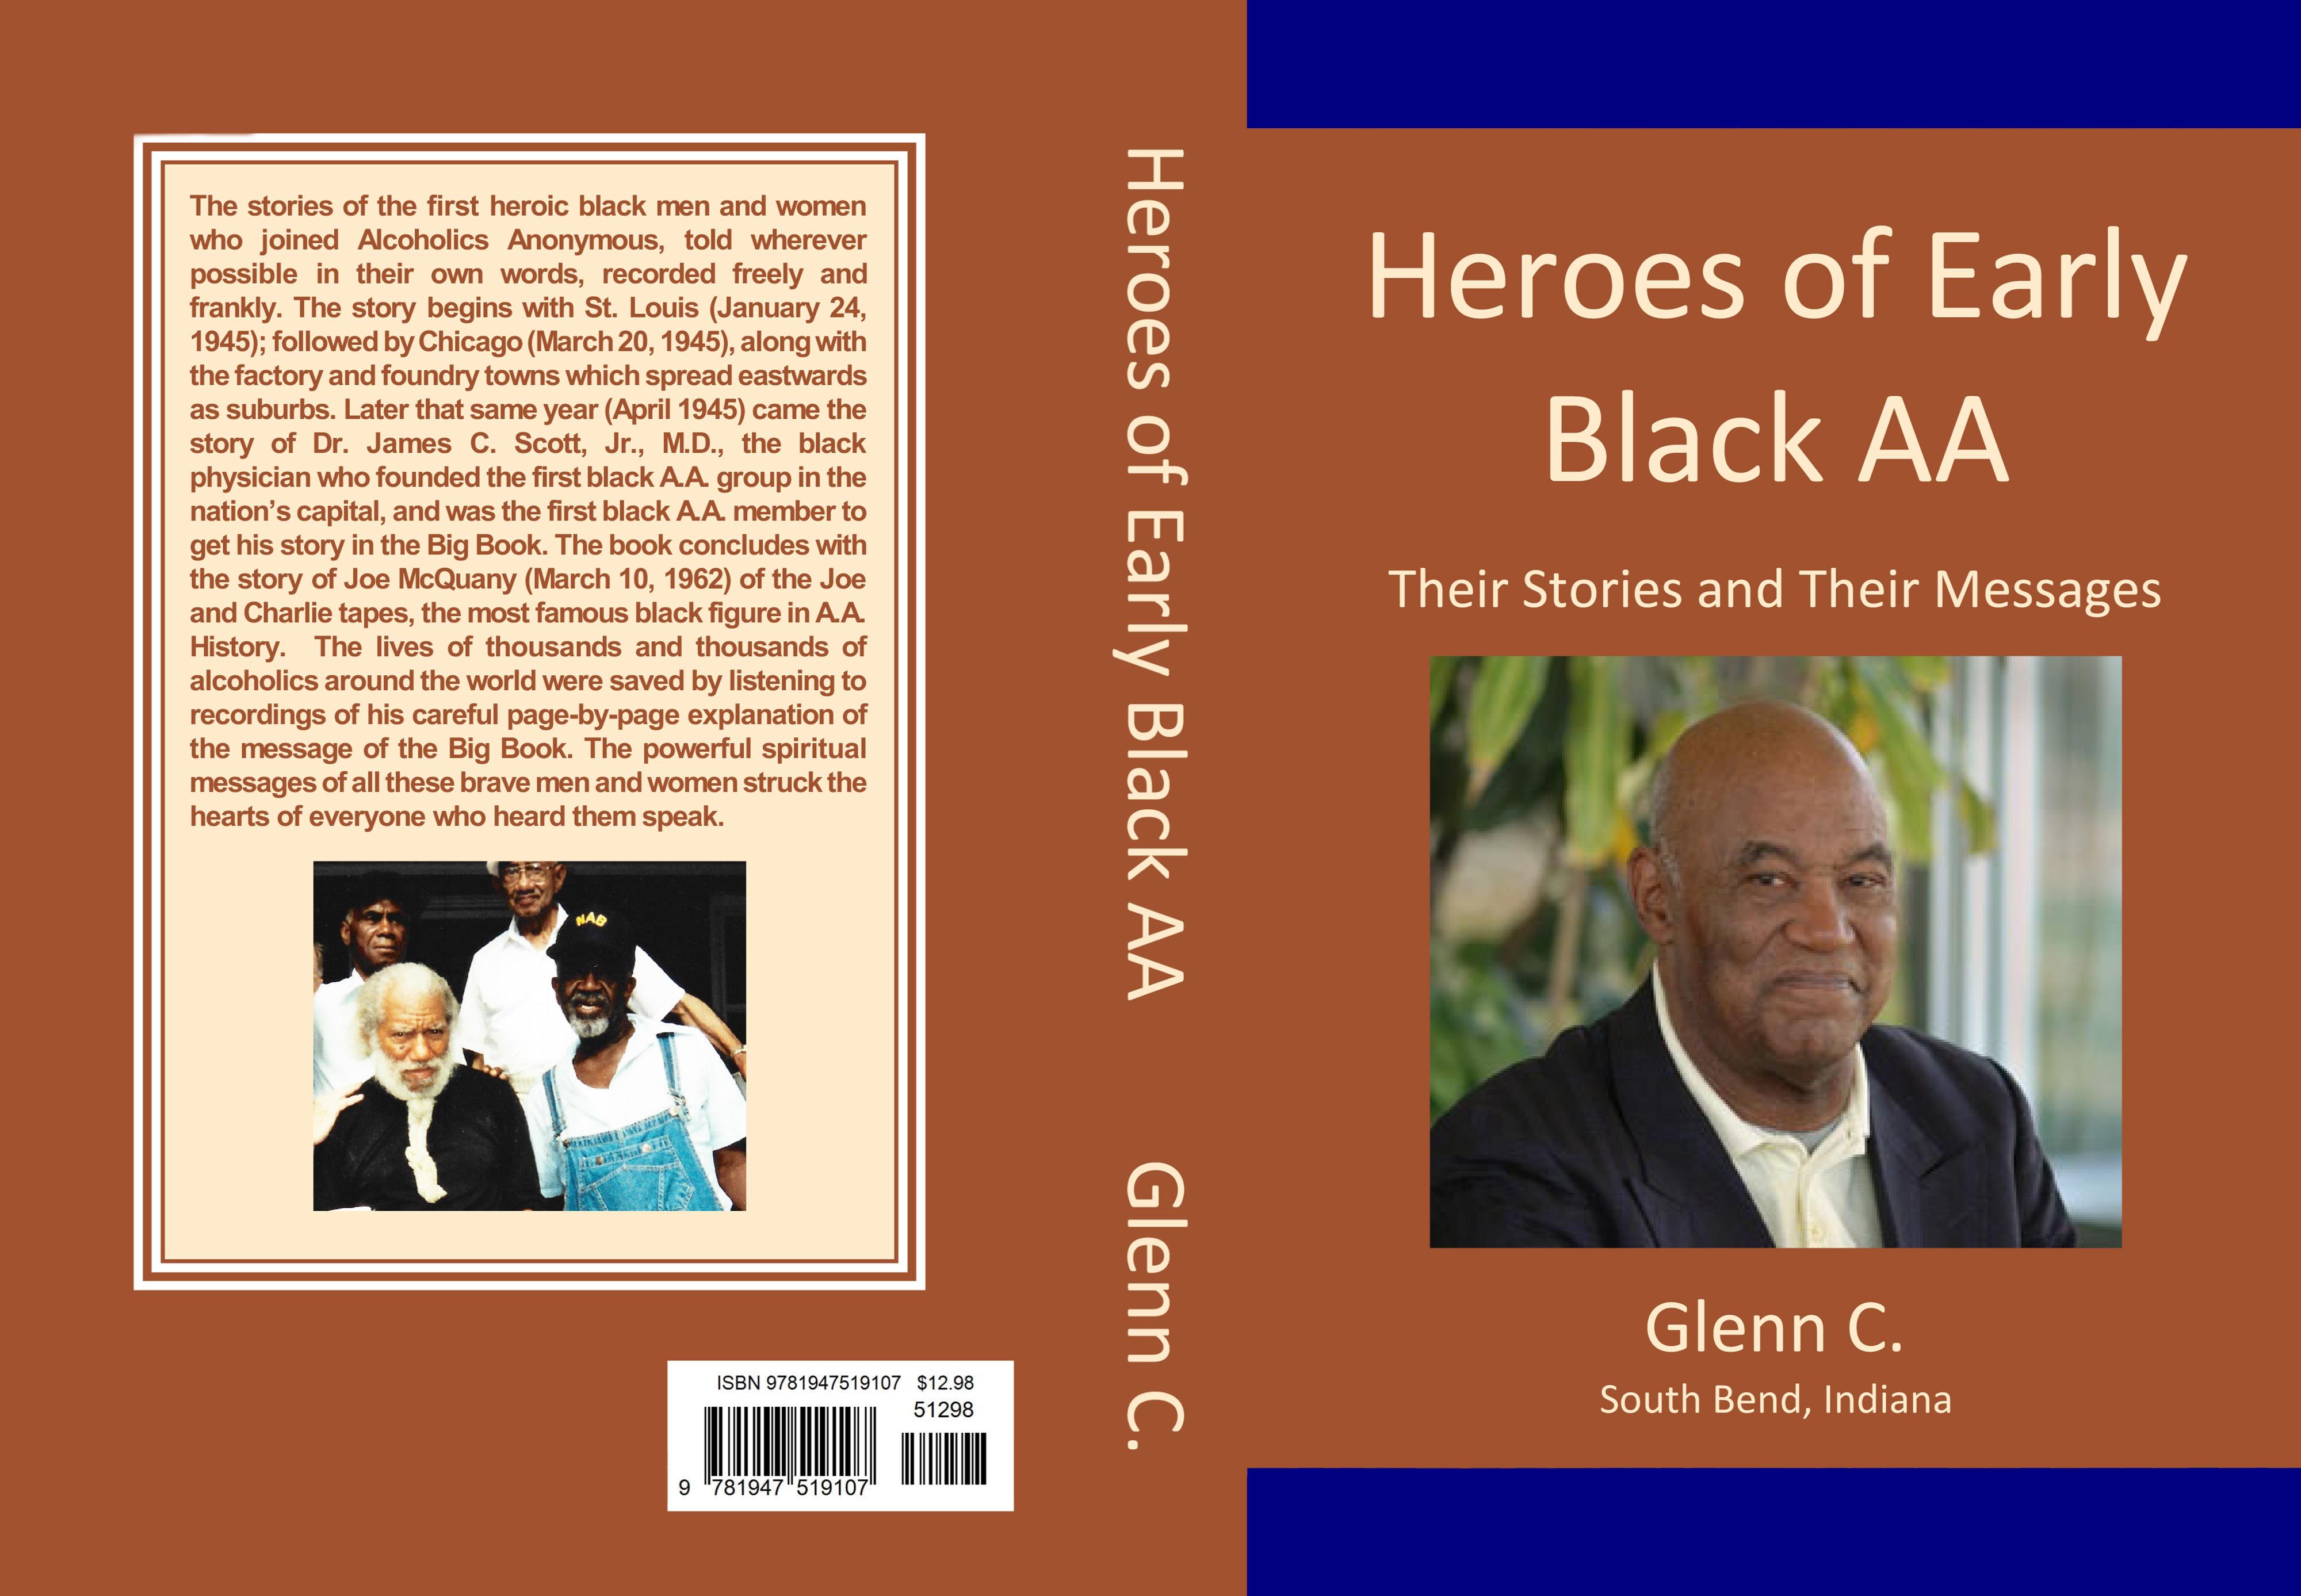 Heroes of Early Black AA: Their Stories and Their Messages cover image